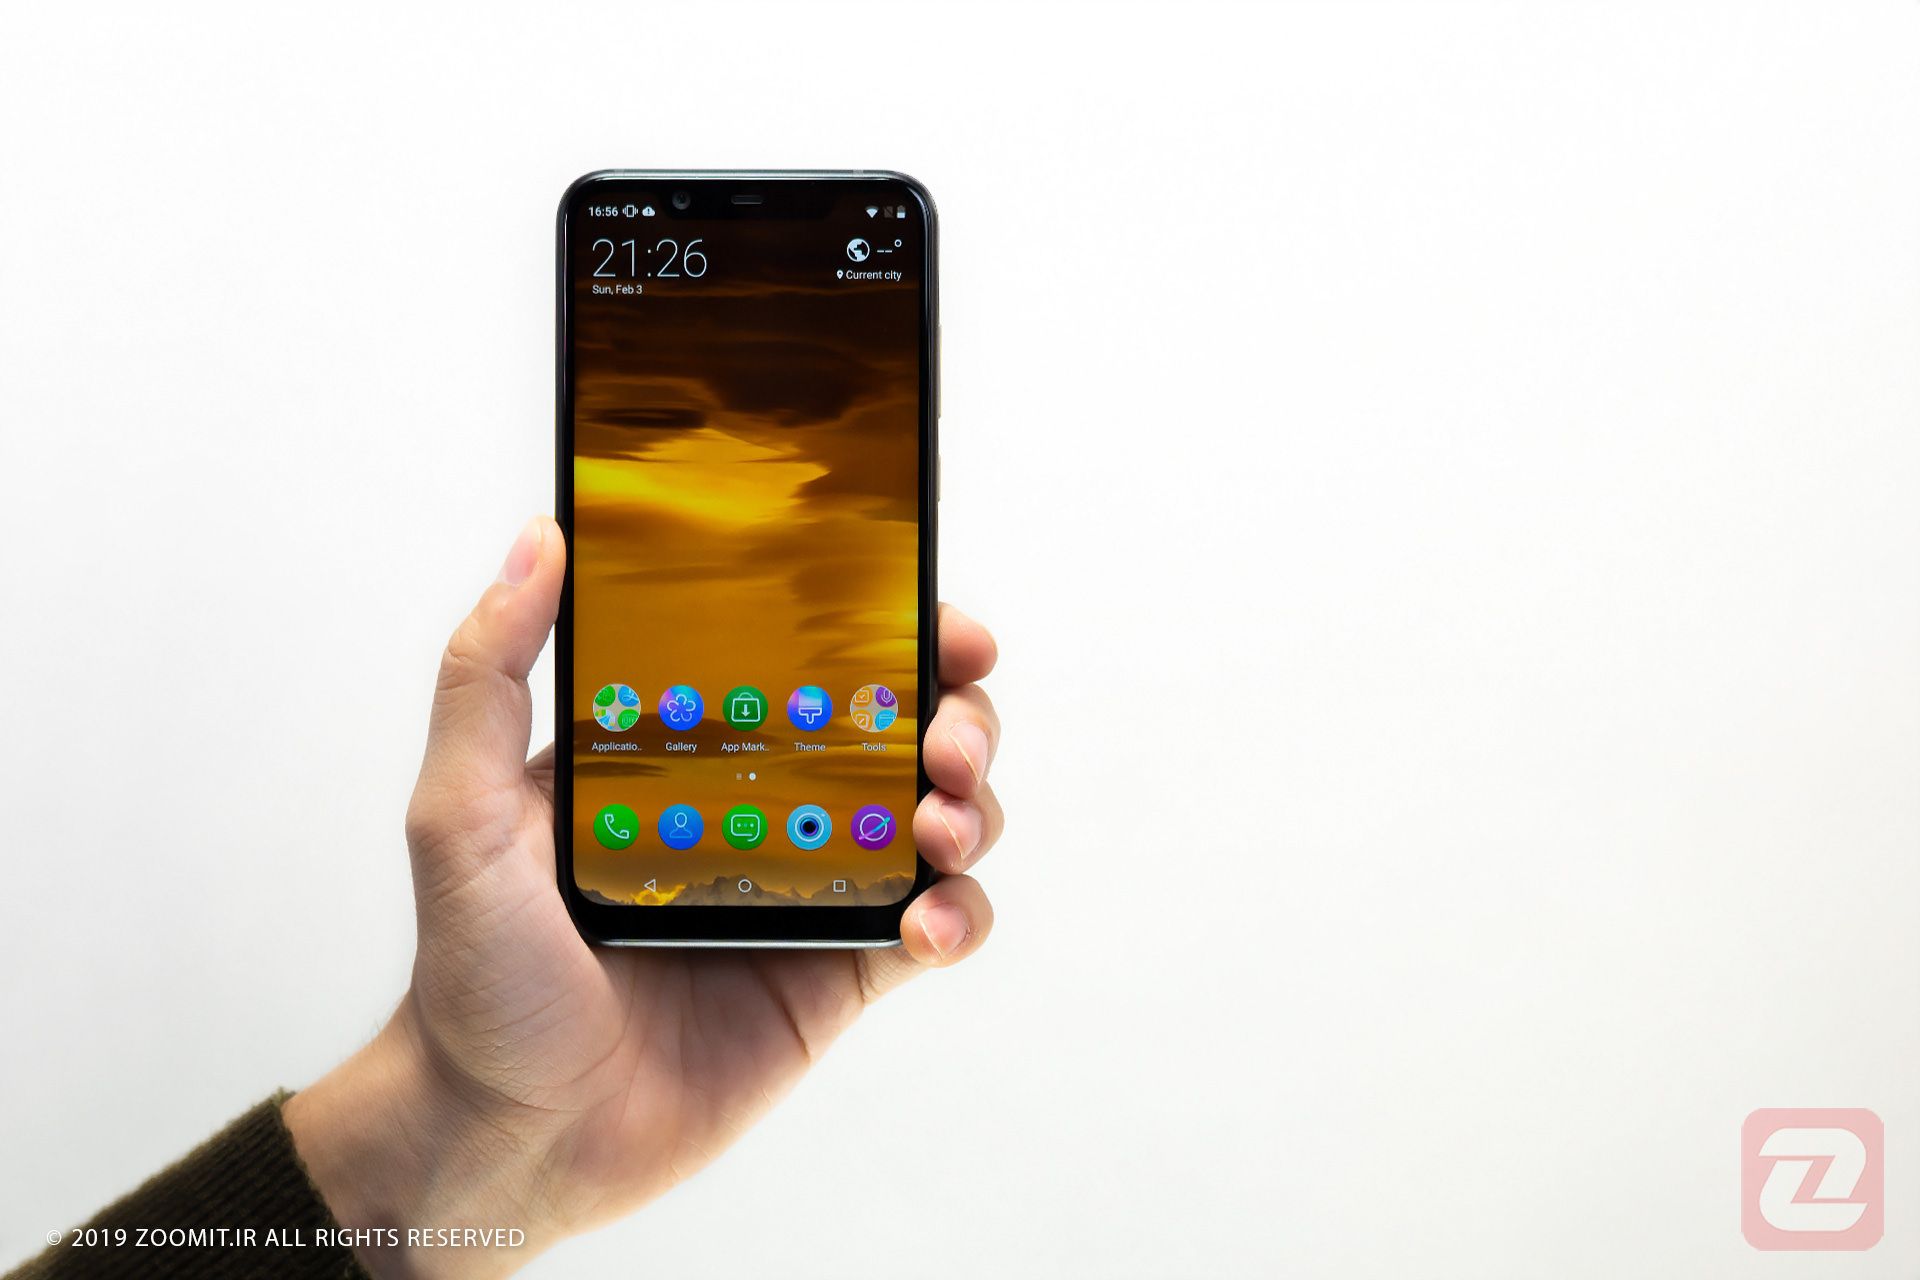 Nokia X7 / Nokia 8.1 in a person's left hand